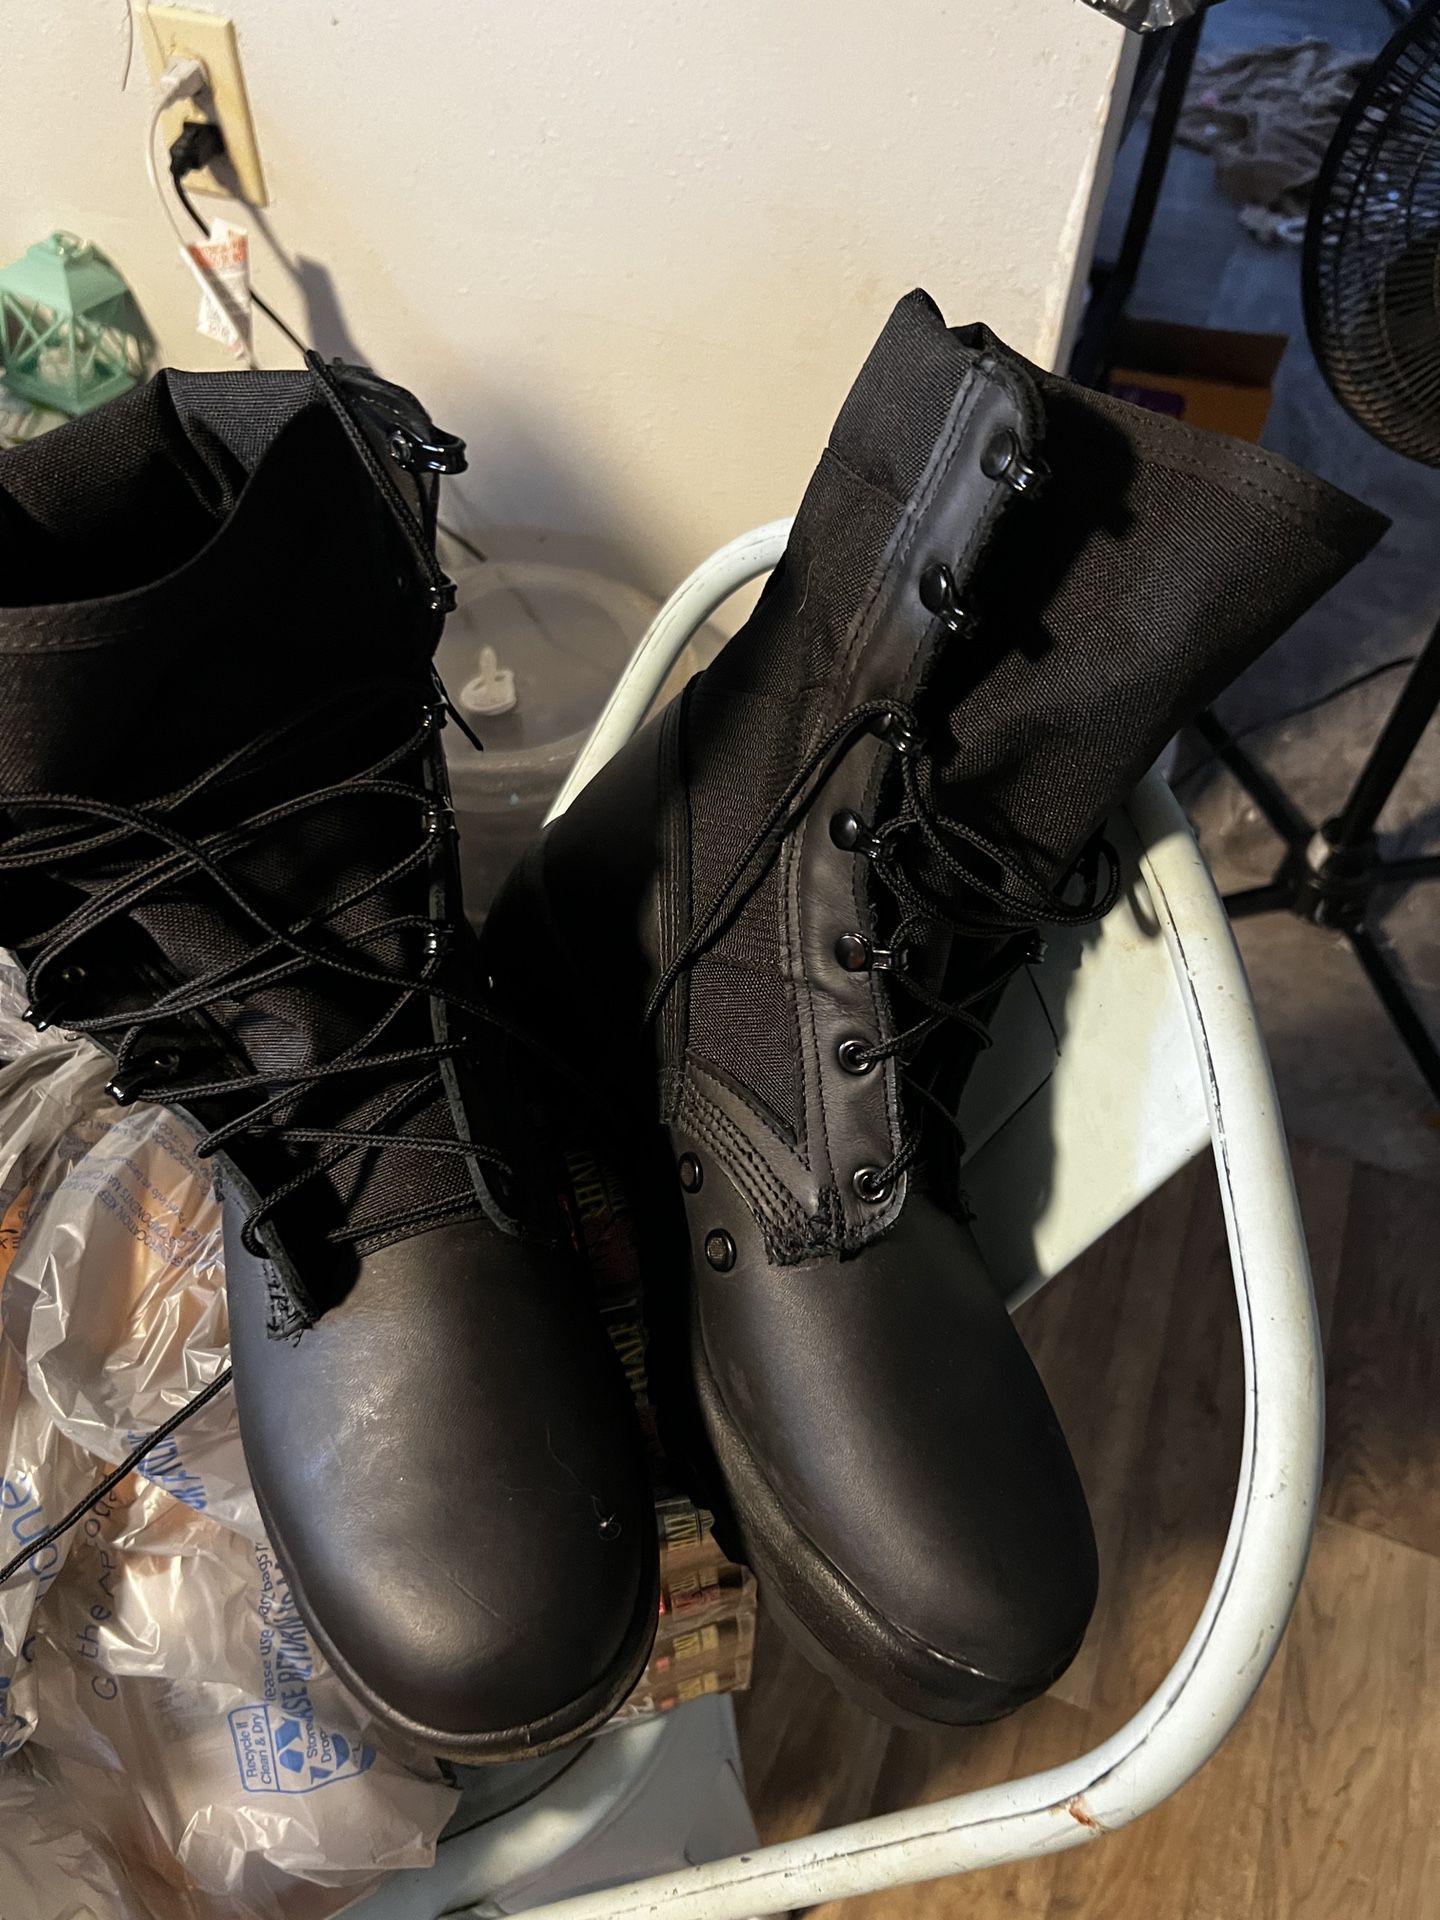 Army Black Combat Boots Never Worn